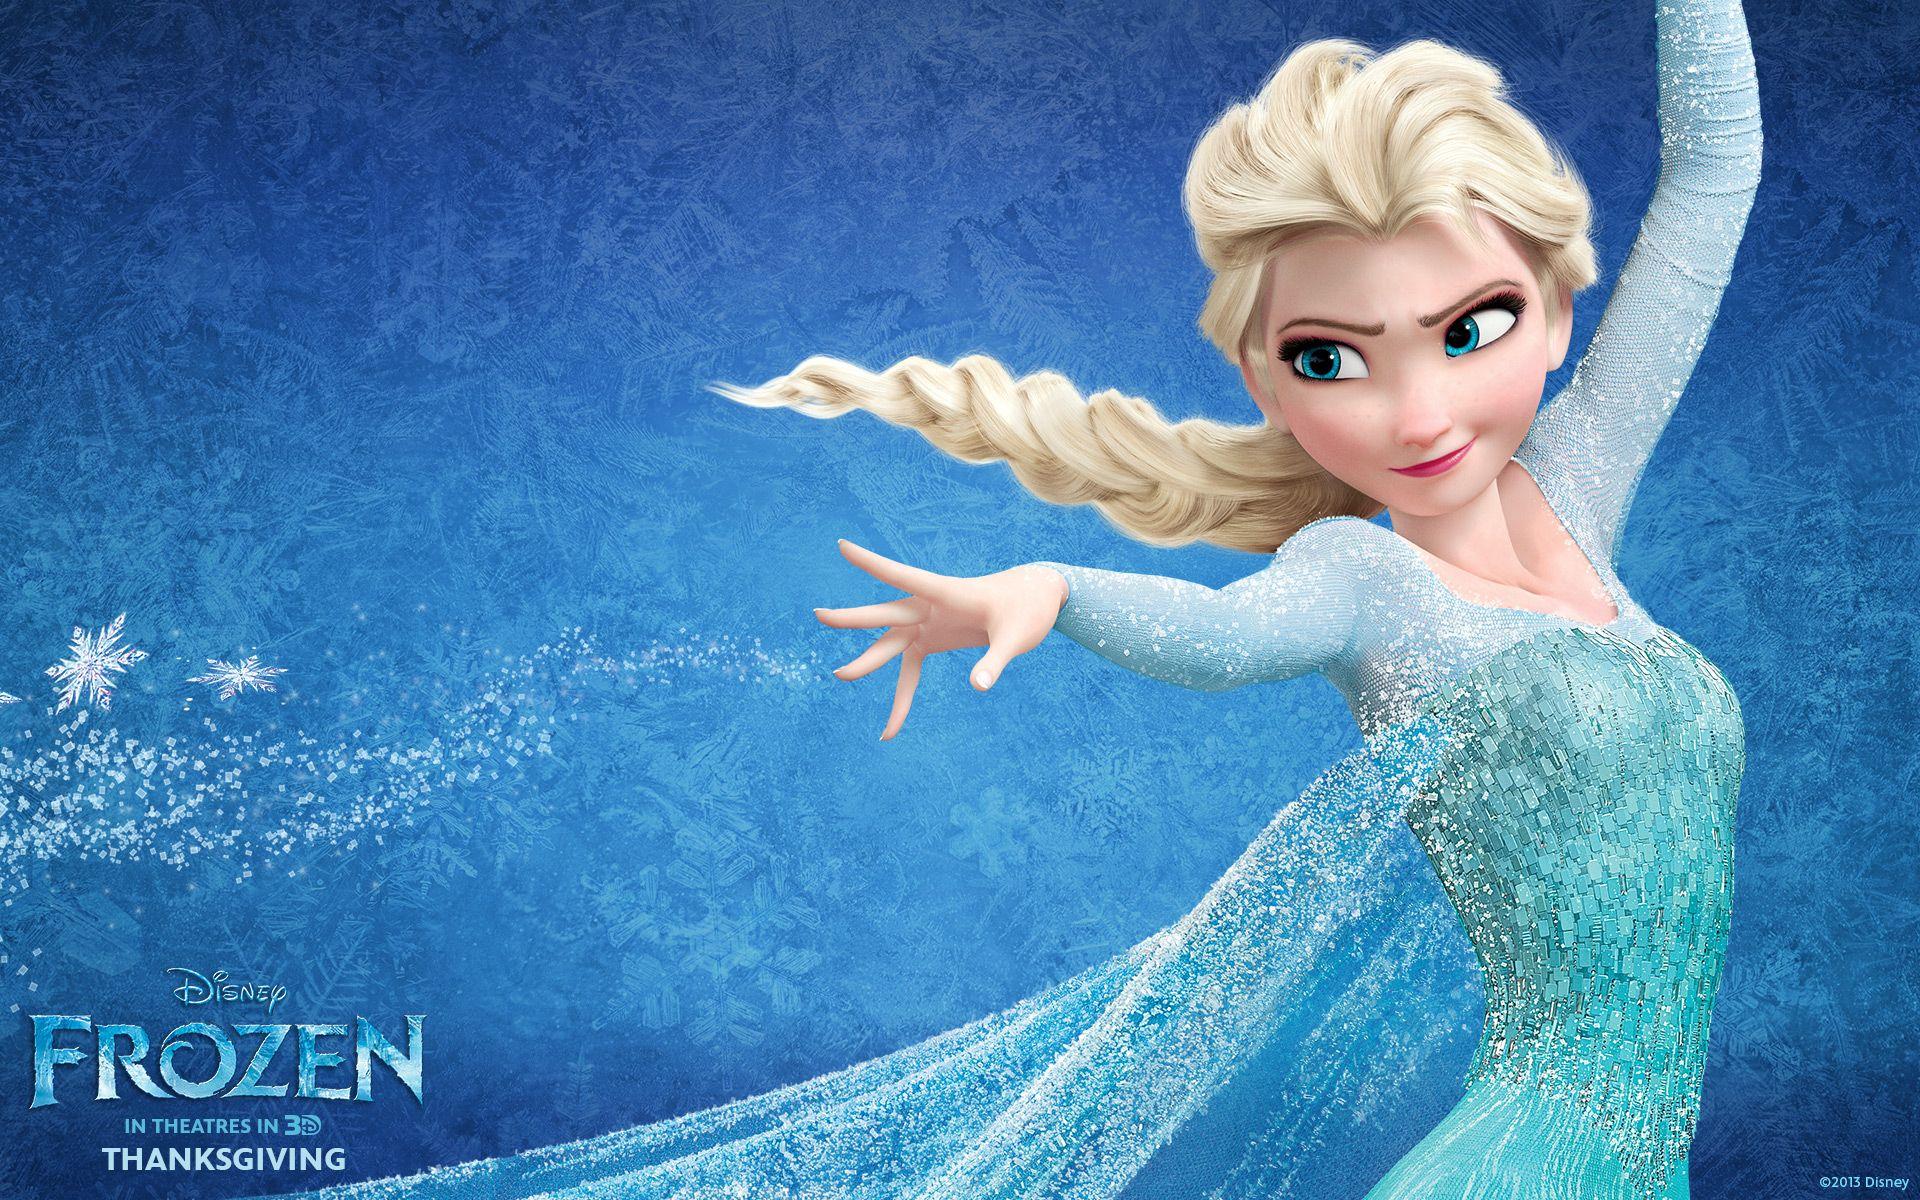 15 new Frozen 2 HD wallpapers with Elsa in white dress and her hair down   desktop and mobile  YouLoveItcom